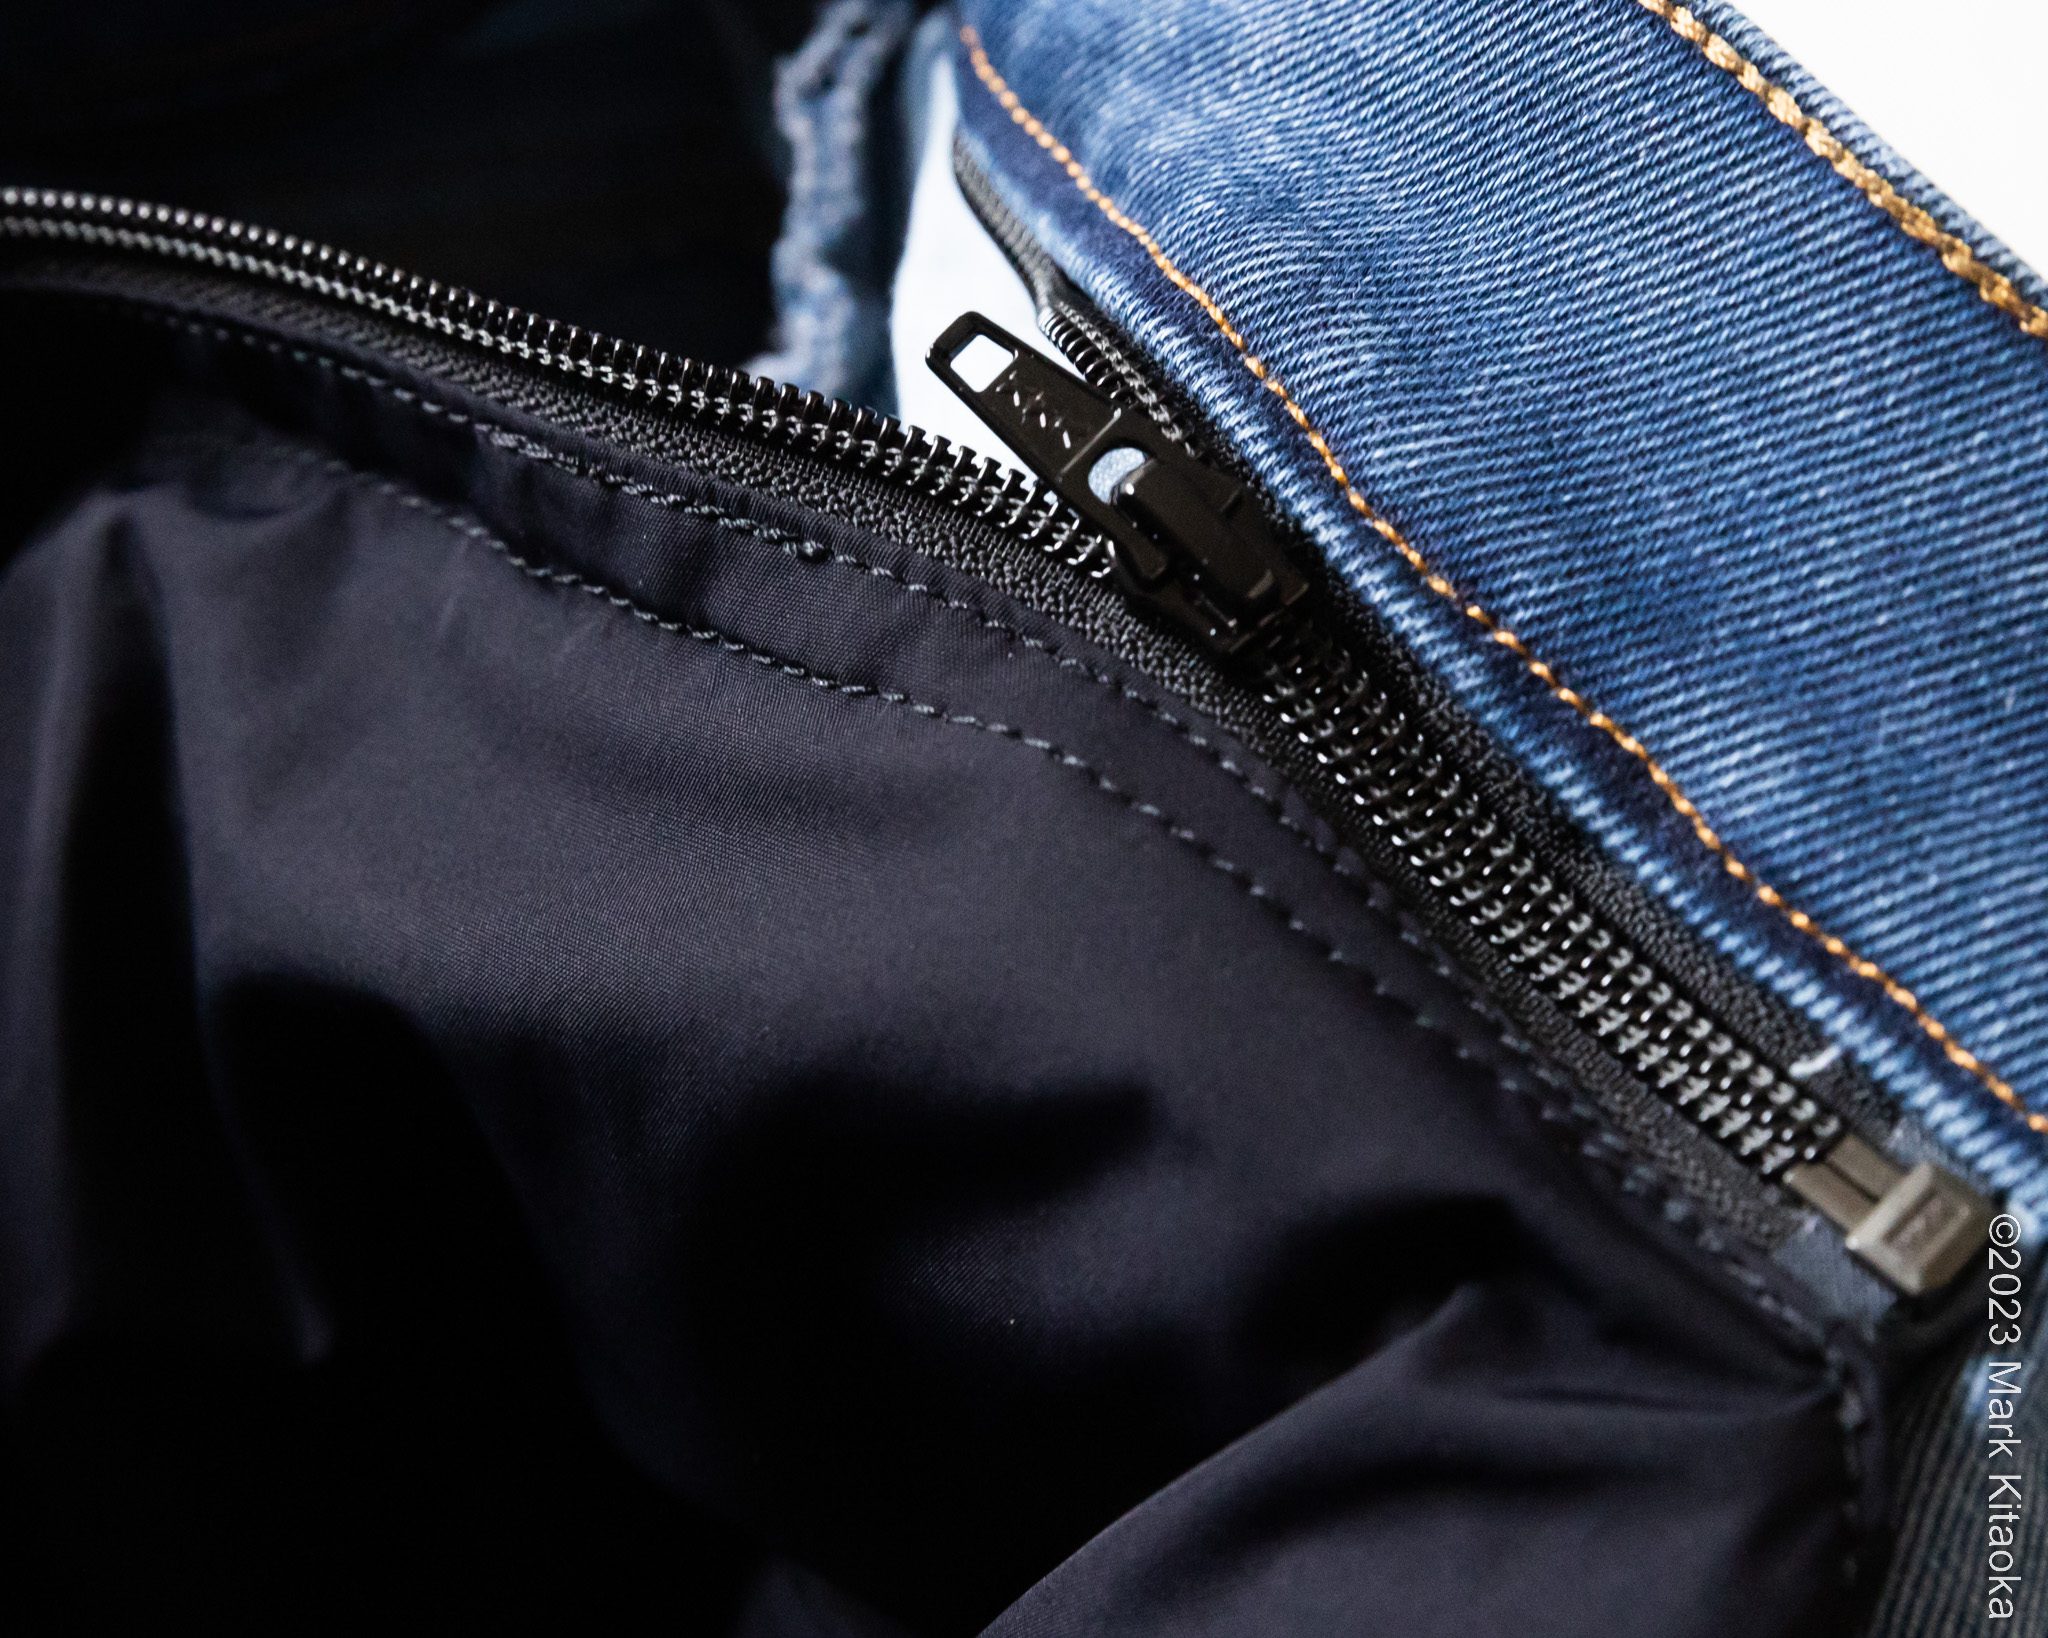 Zipper length of the airbag pants